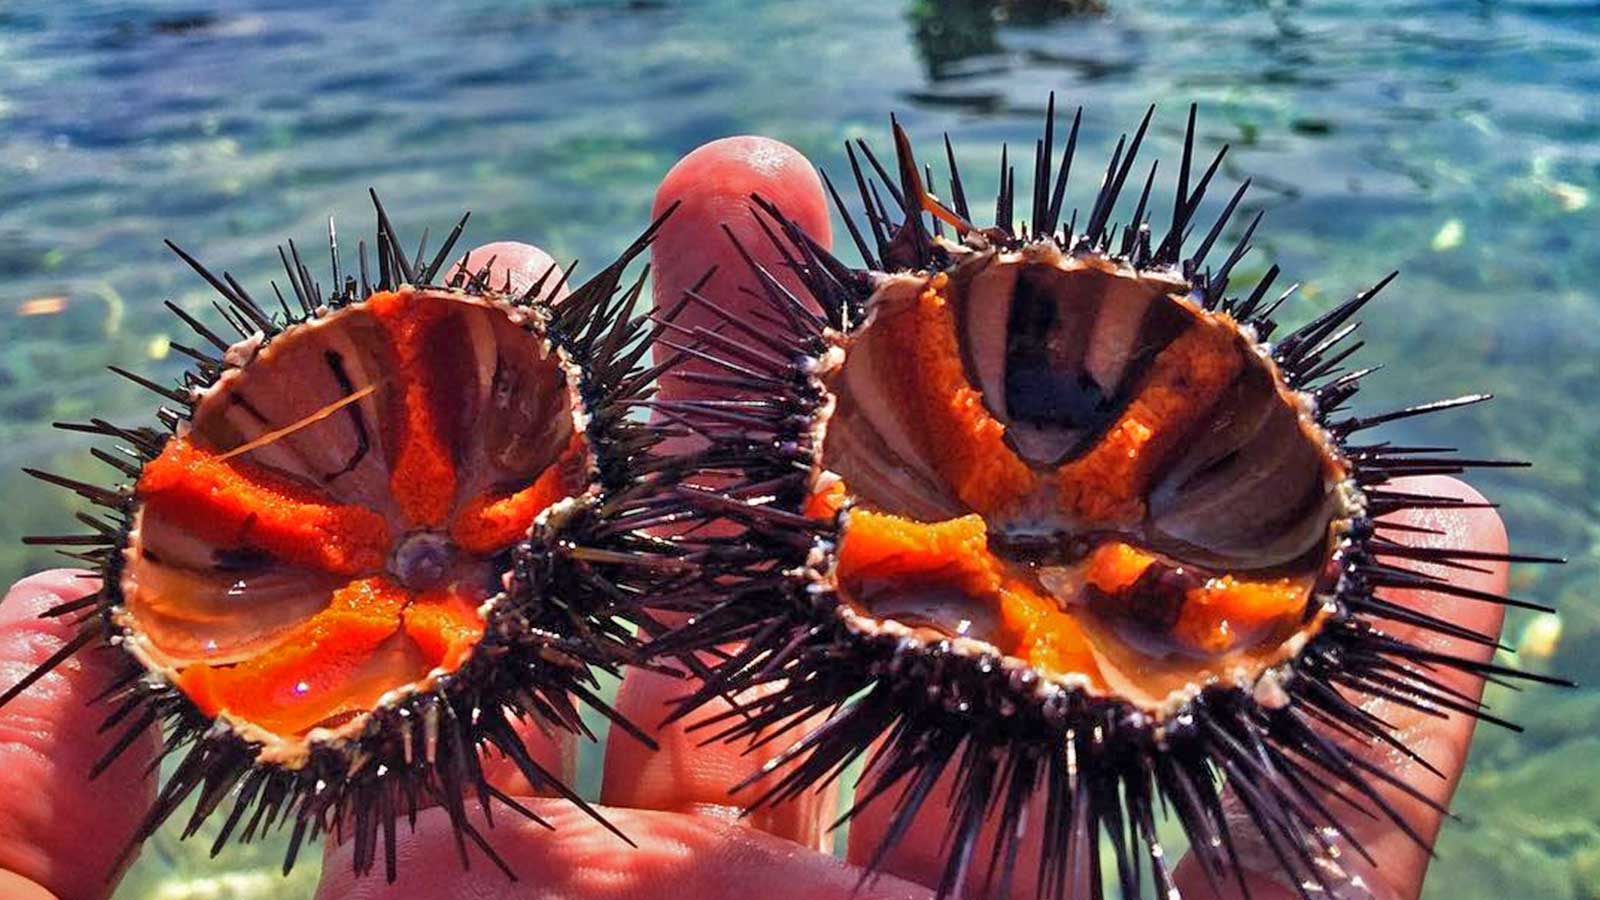 Do urchins have a brain?